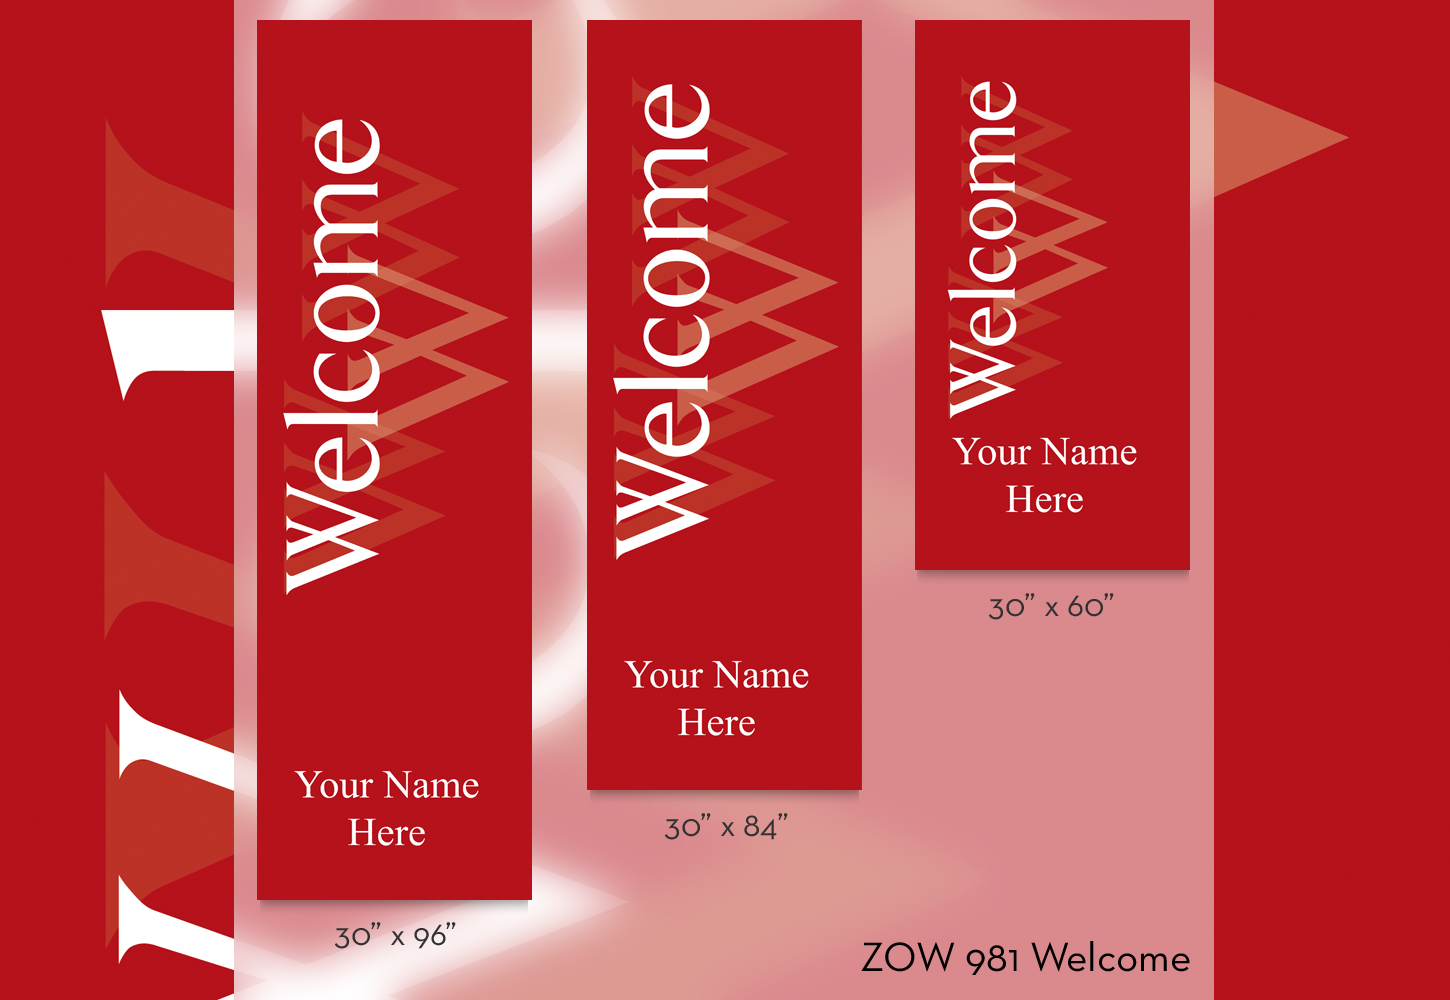 ZOW 981 Welcome